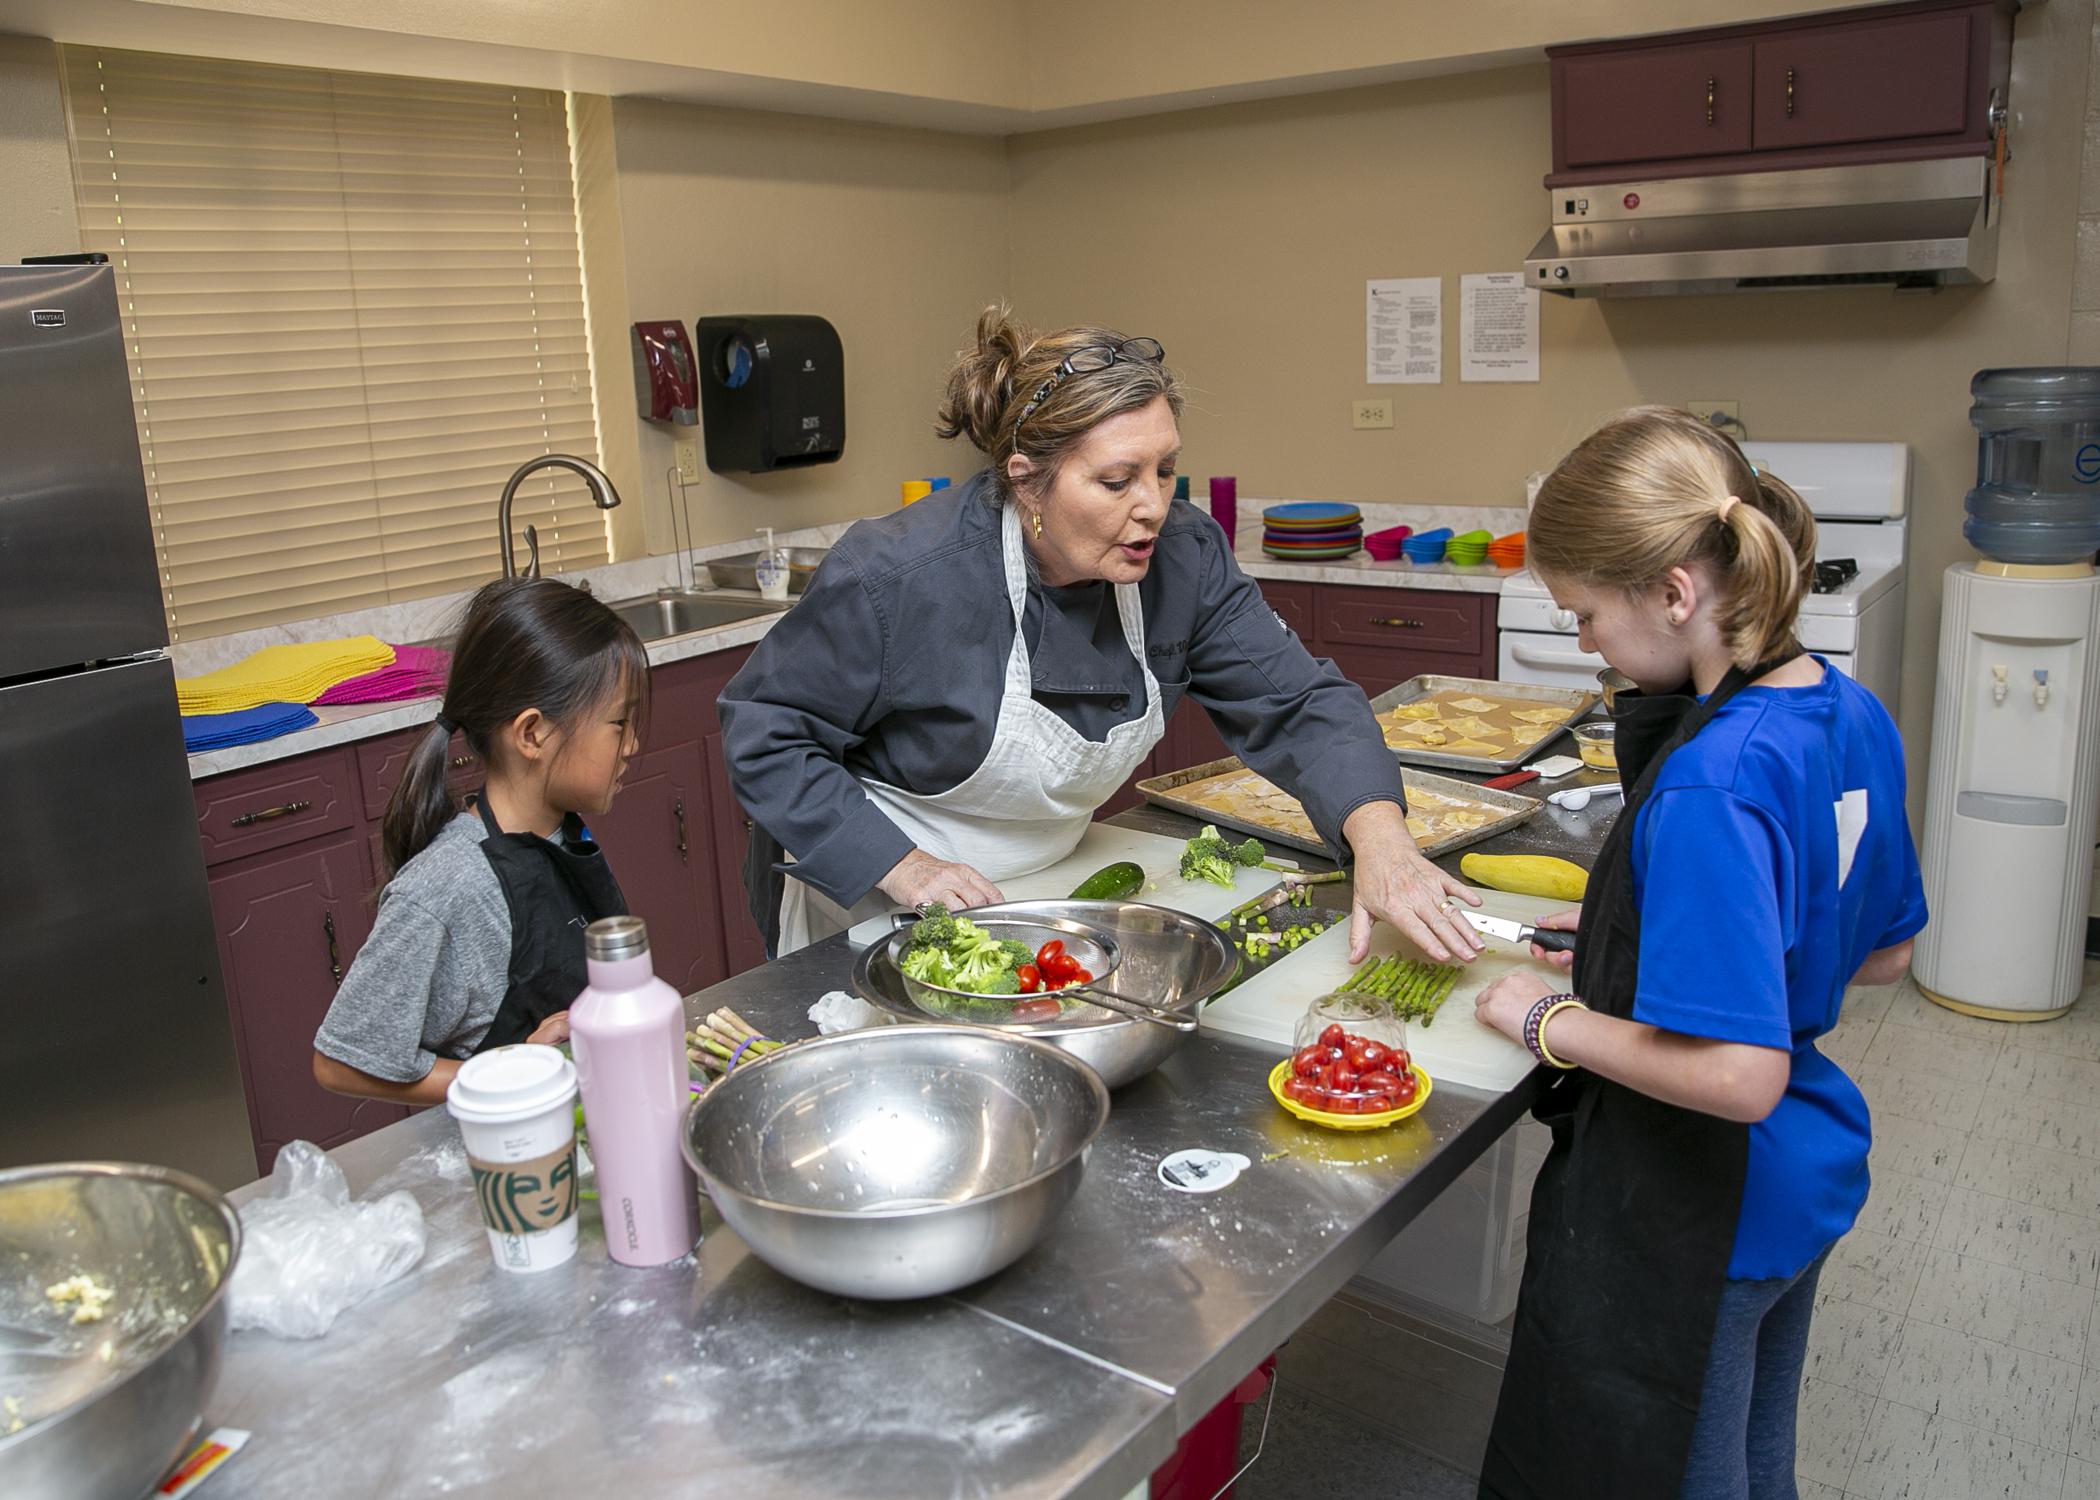  adult instructs two children in a kitchen setting.